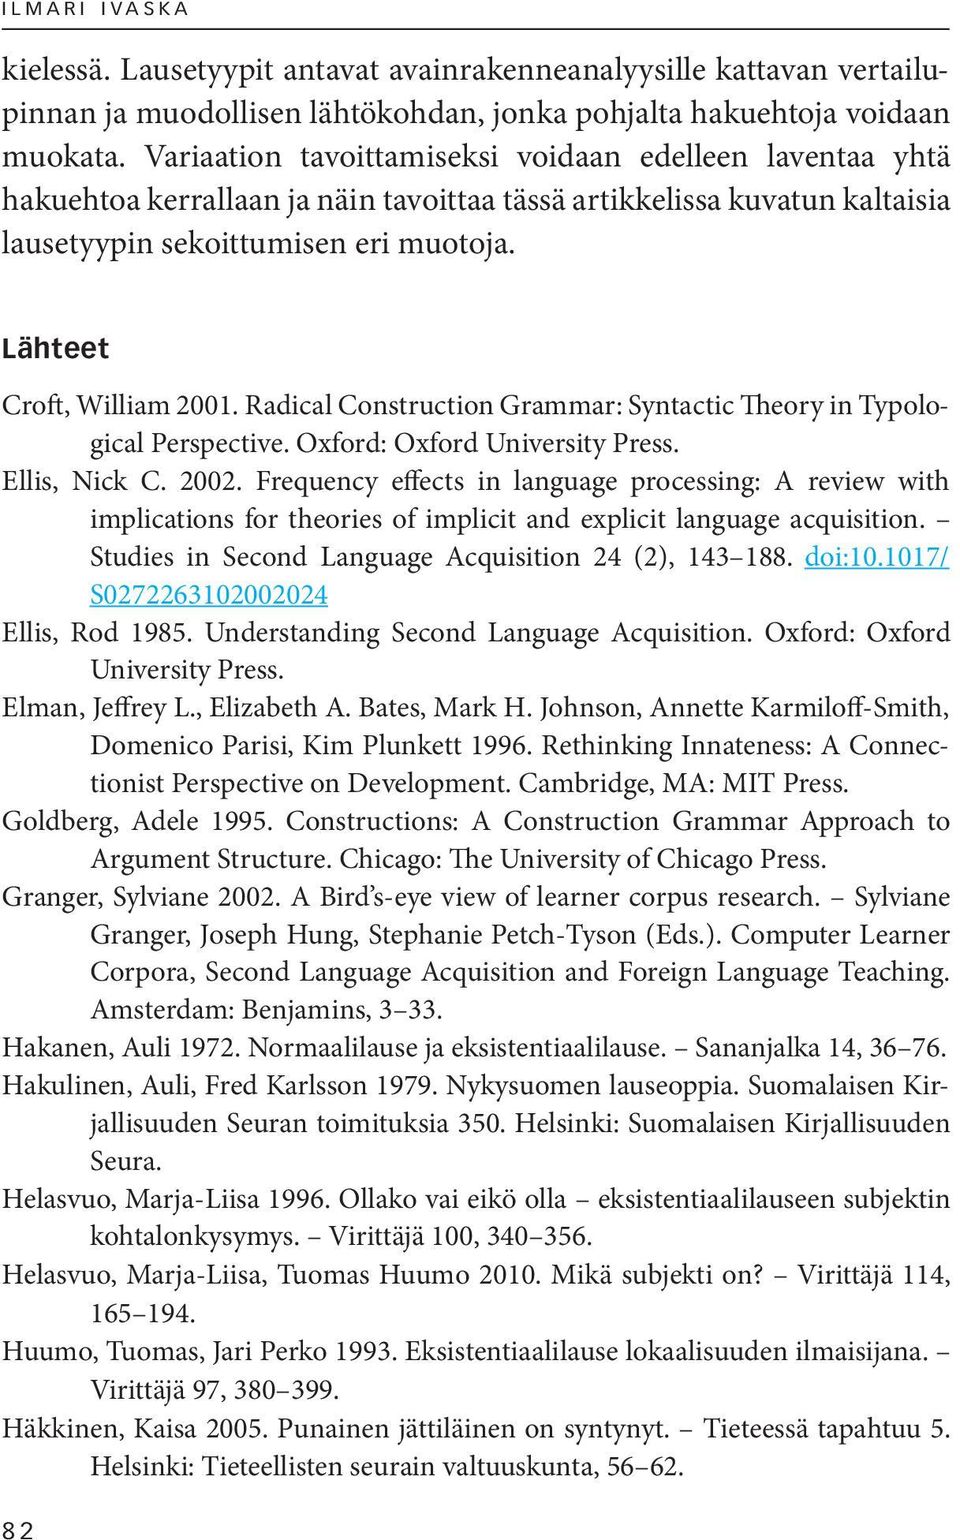 Lähteet Croft, William 2001. Radical Construction Grammar: Syntactic Theory in Typological Perspective. Oxford: Oxford University Press. Ellis, Nick C. 2002.